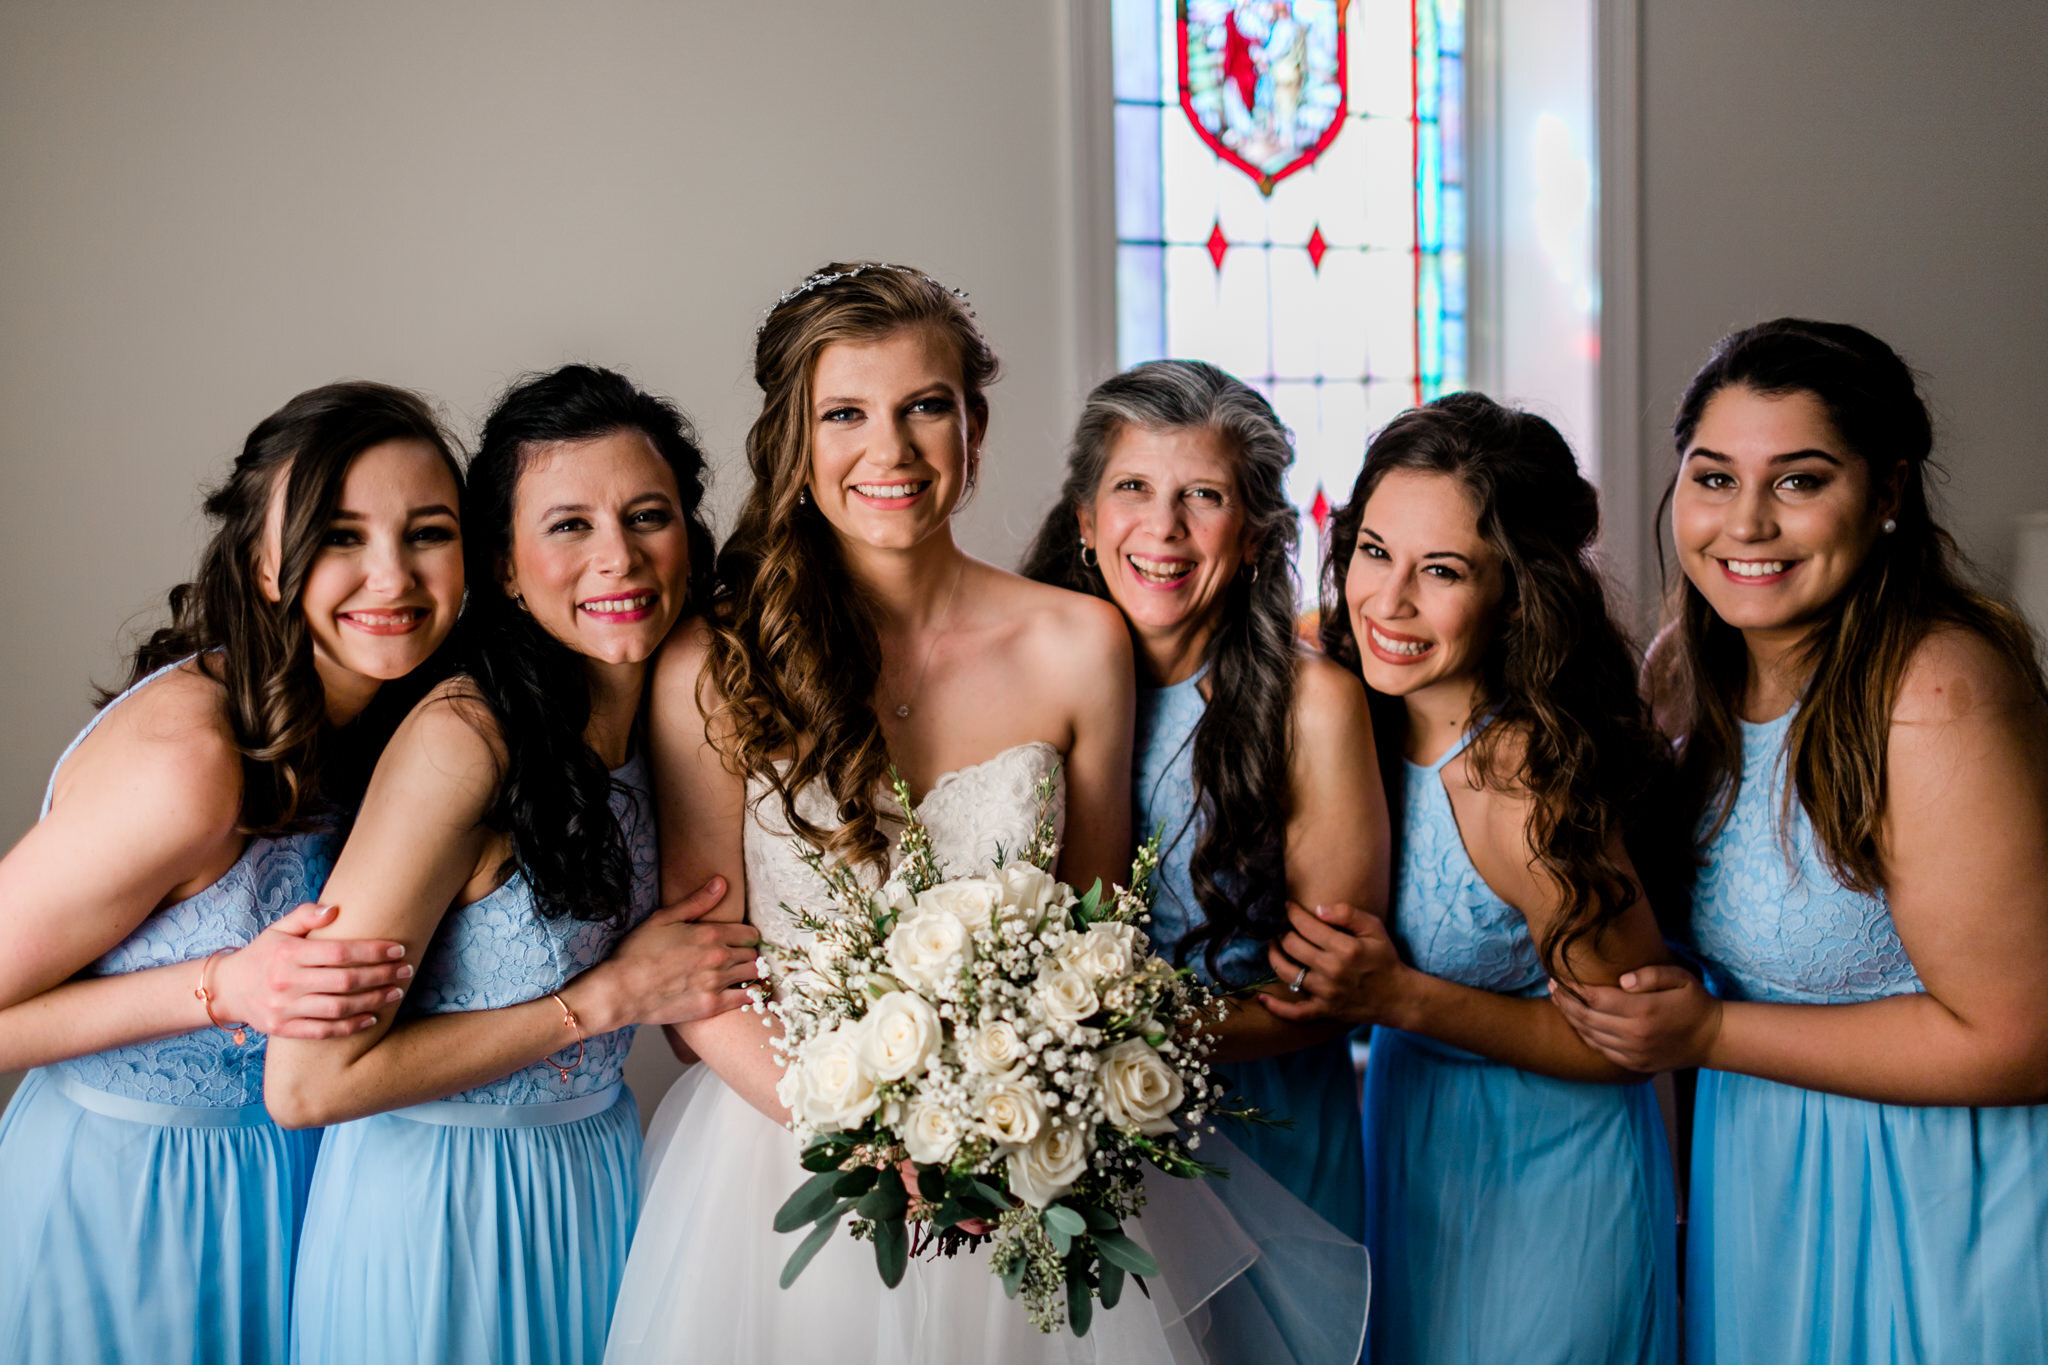 Durham Wedding Photographer | By G. Lin Photography | Gorgeous portrait of bride and bridesmaids